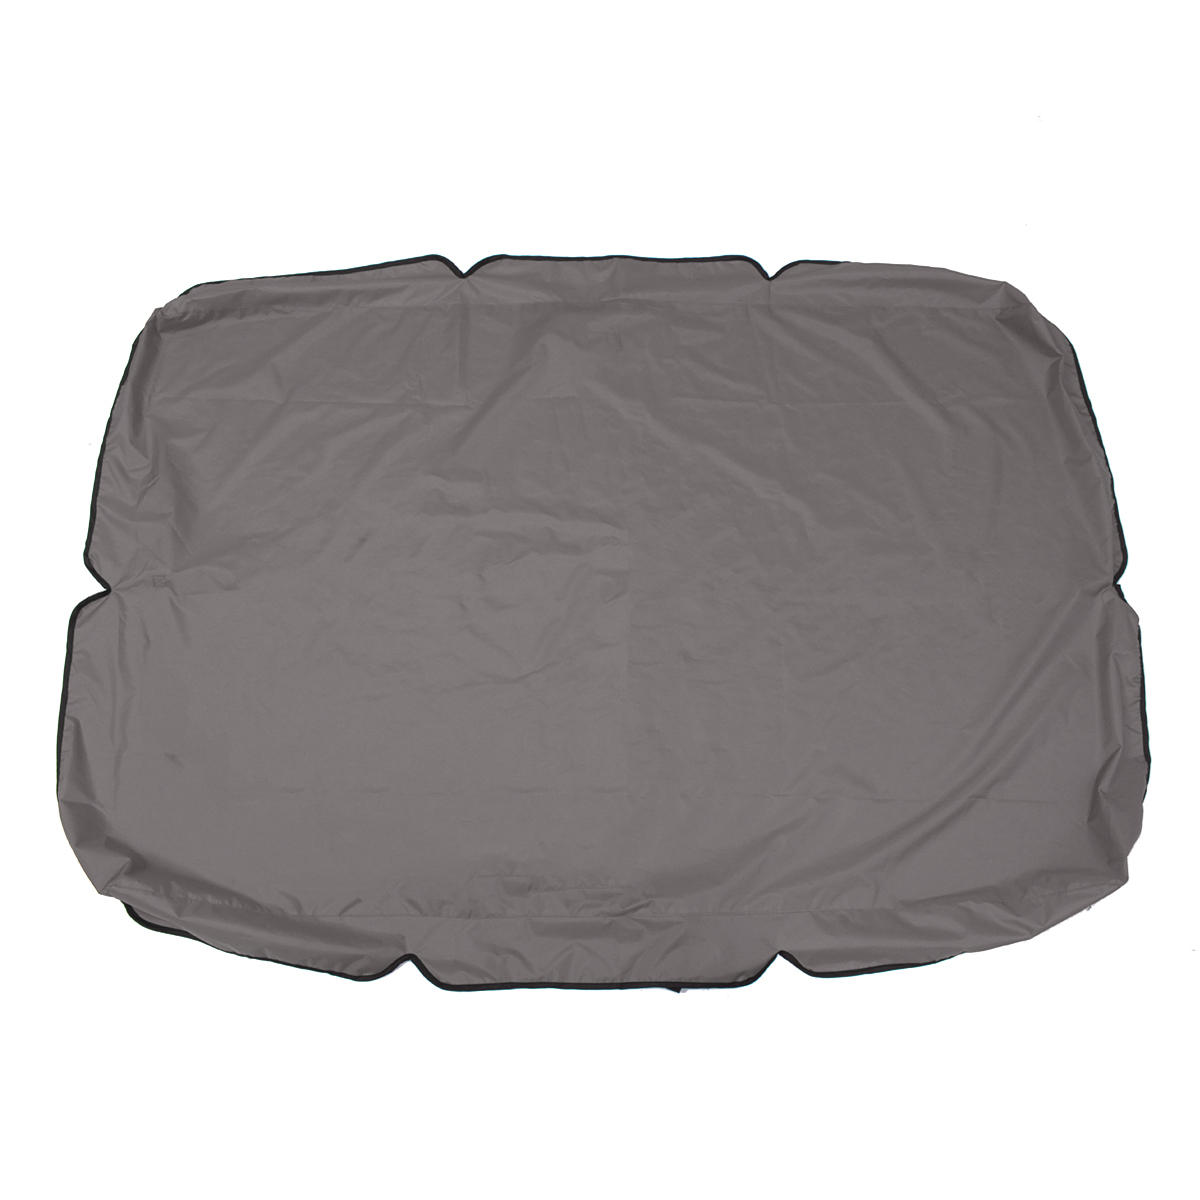 best price,patio,swing,canopy,top,cover,75x52x5.9inch,discount